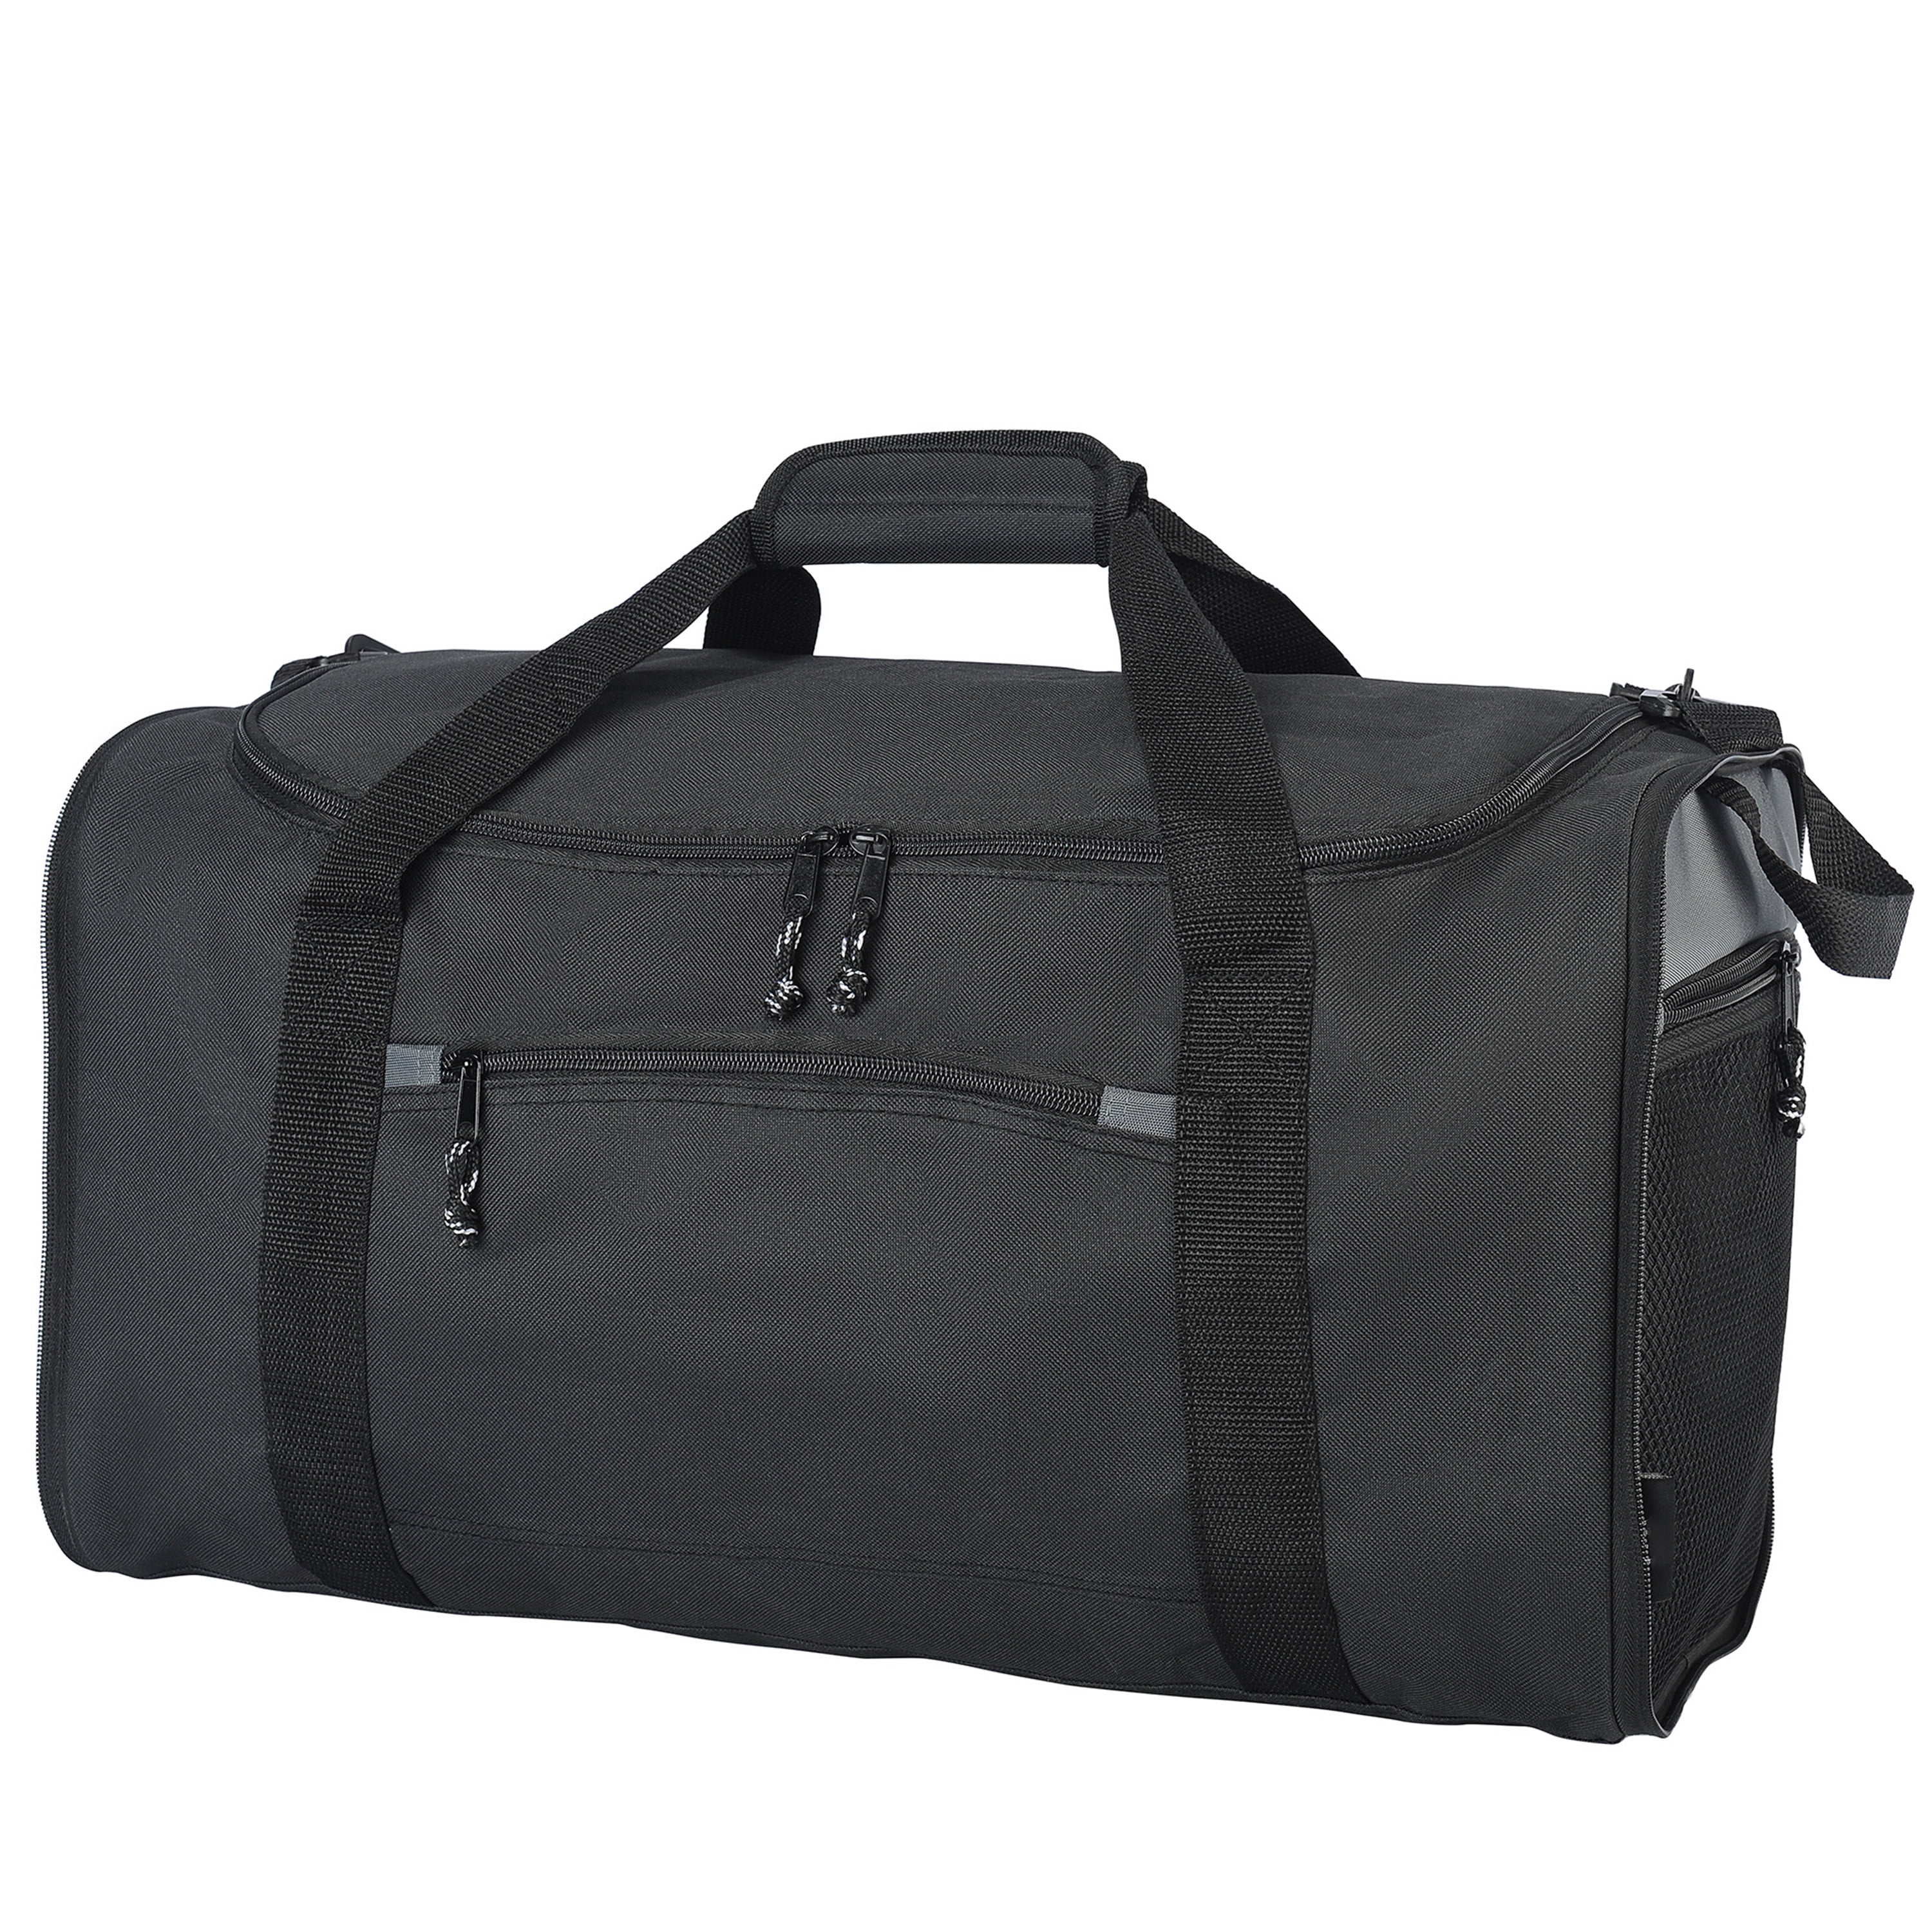 Travel Gym Duffle Duffel Bag Deluxe Sports Bag Luggage in Black 19" 